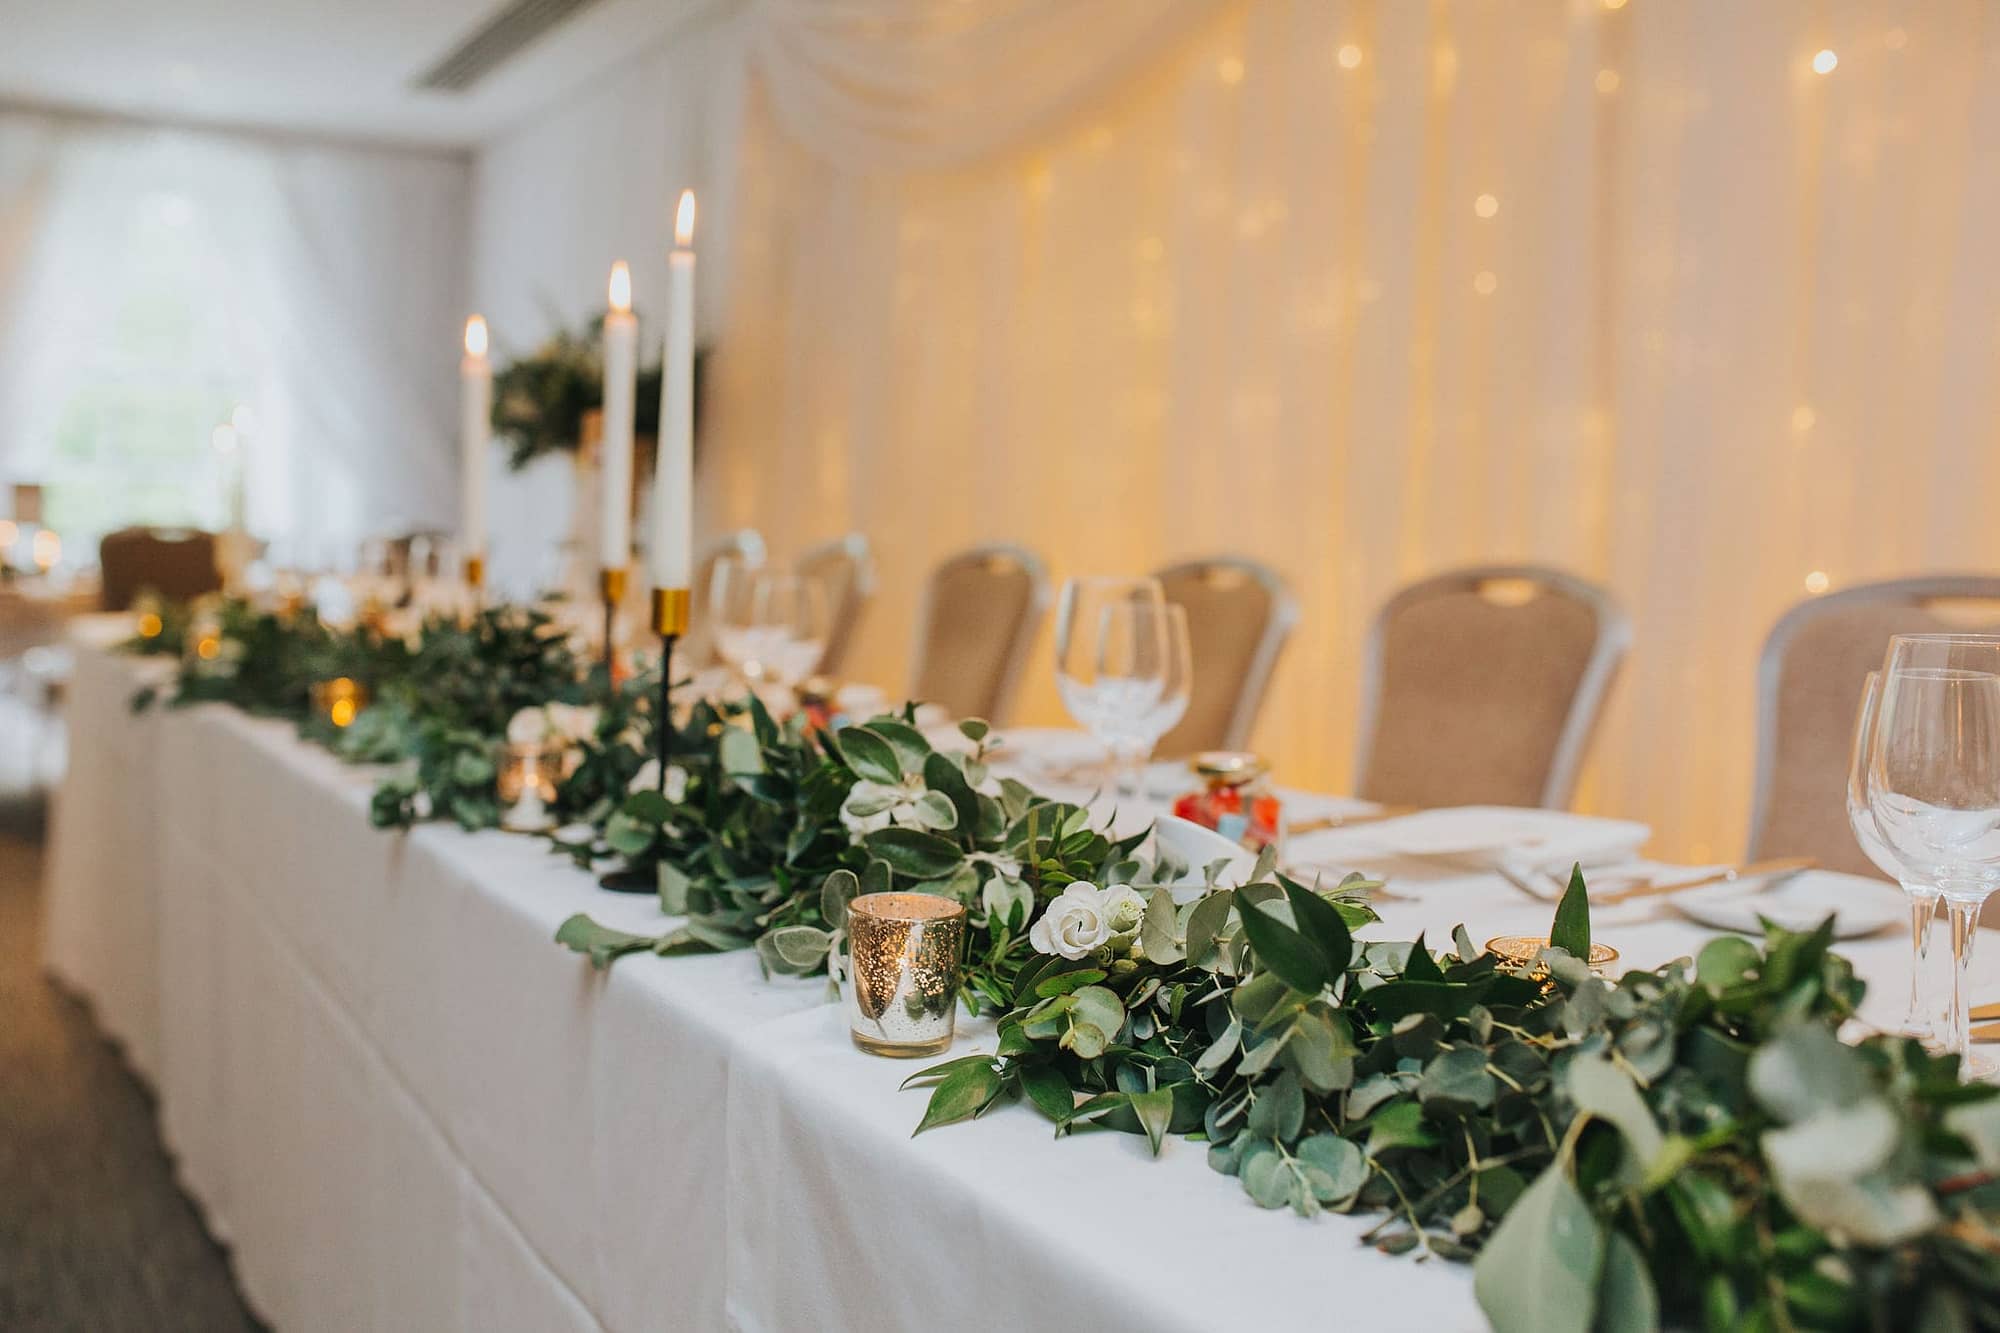 Top table foliage runner with eucalyptus and white roses at Alexander House